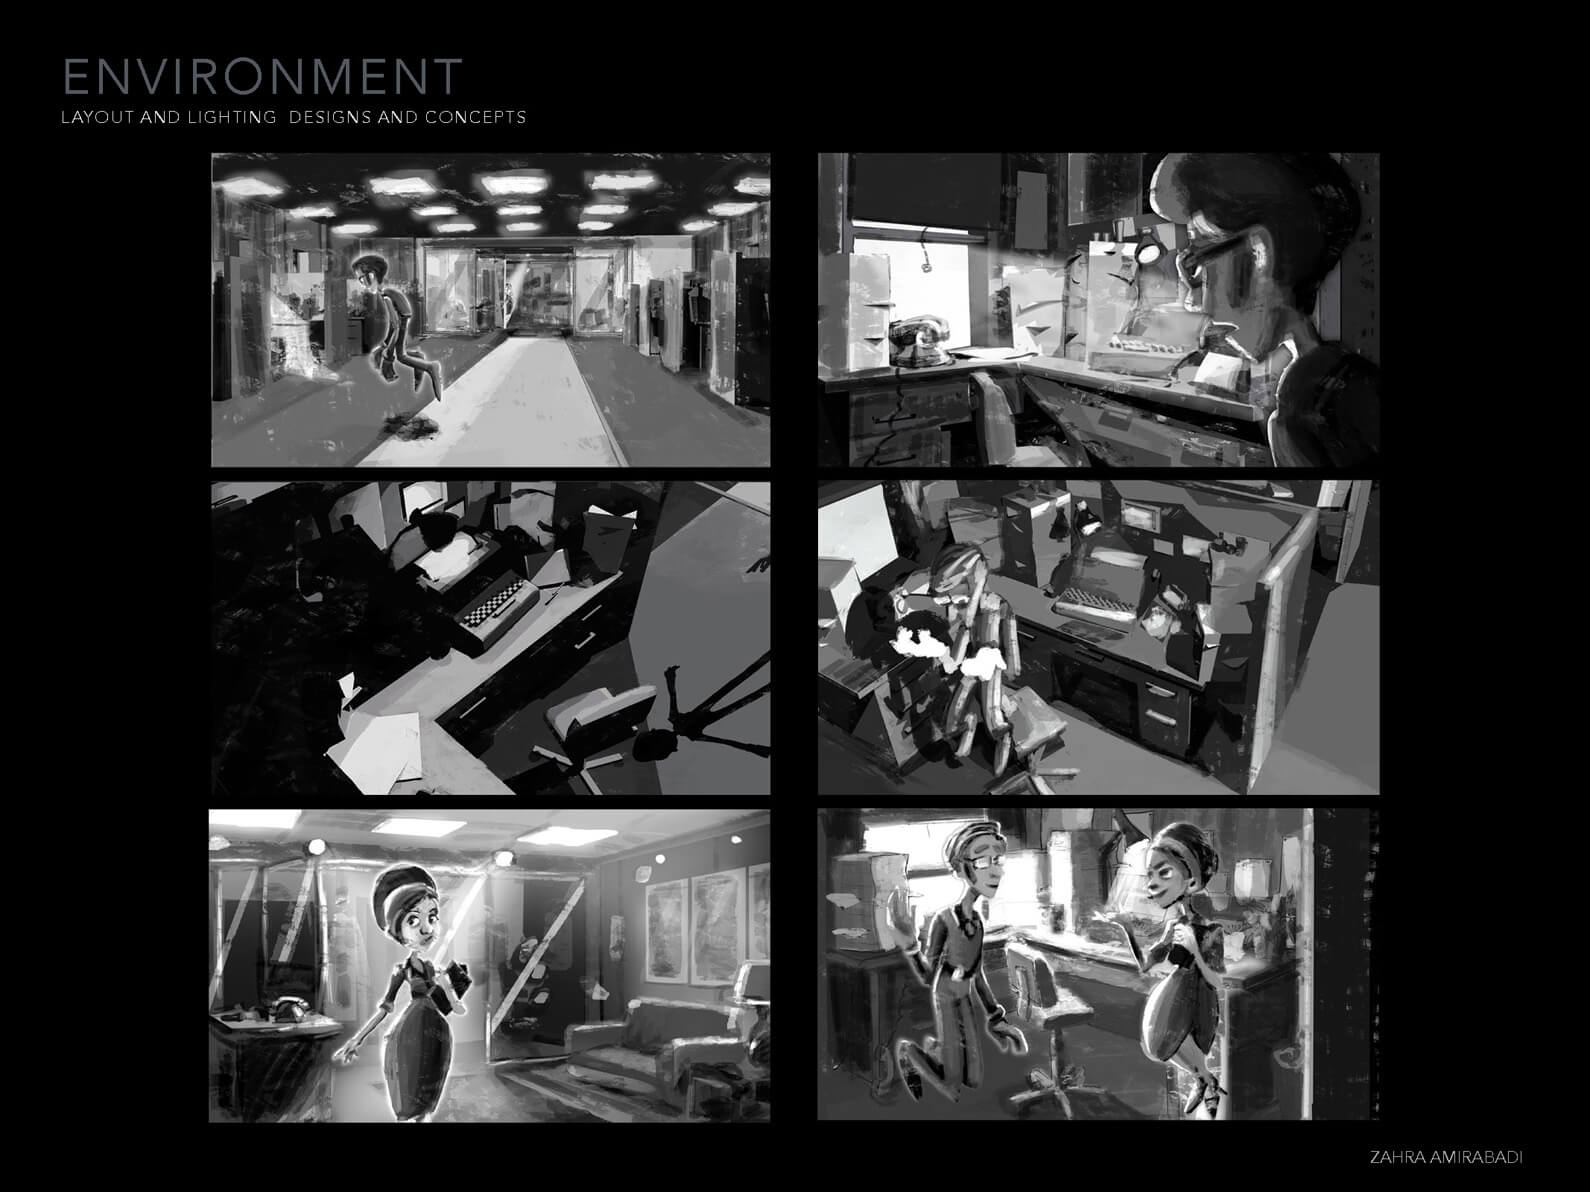 Layout and lighting design for Orientation Center for the Unseen depicting various still scenes in black and white